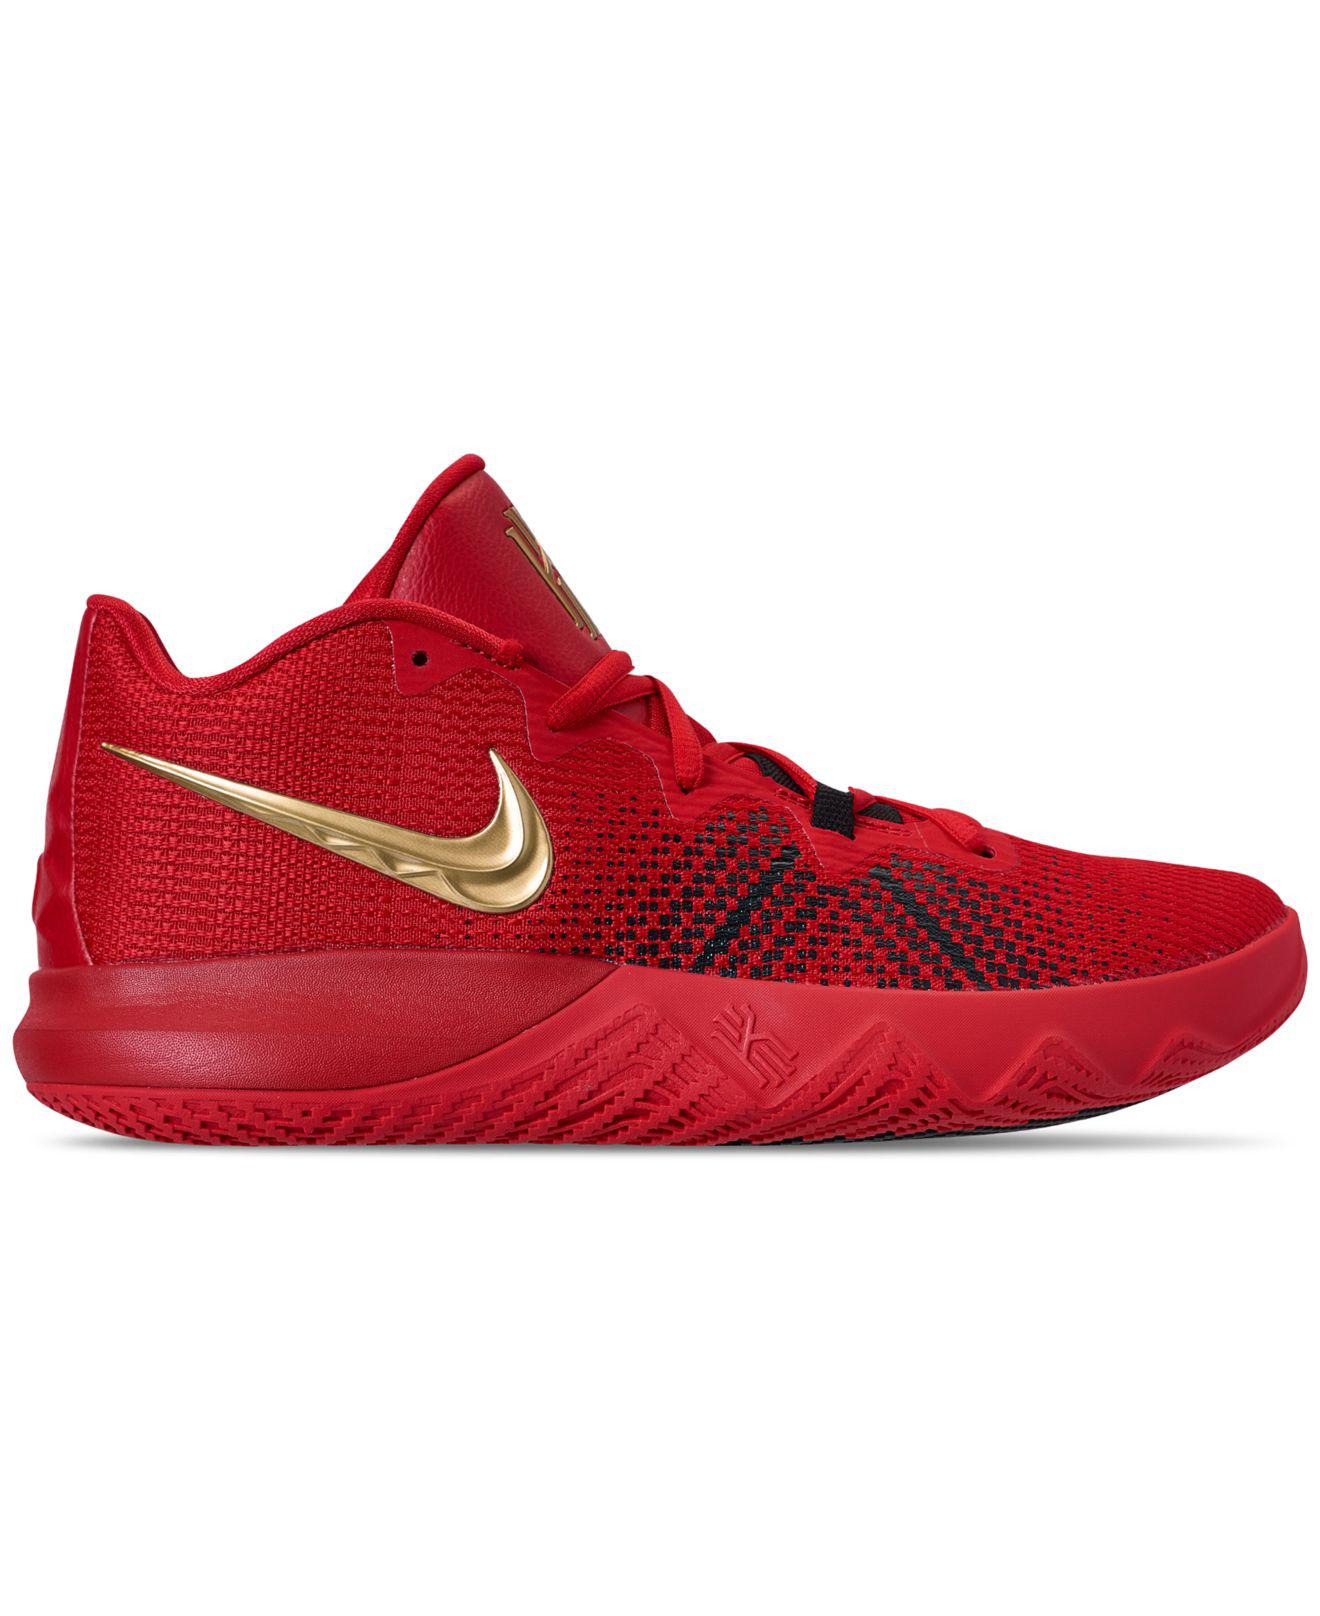 Nike Leather Kyrie Flytrap in Red for 